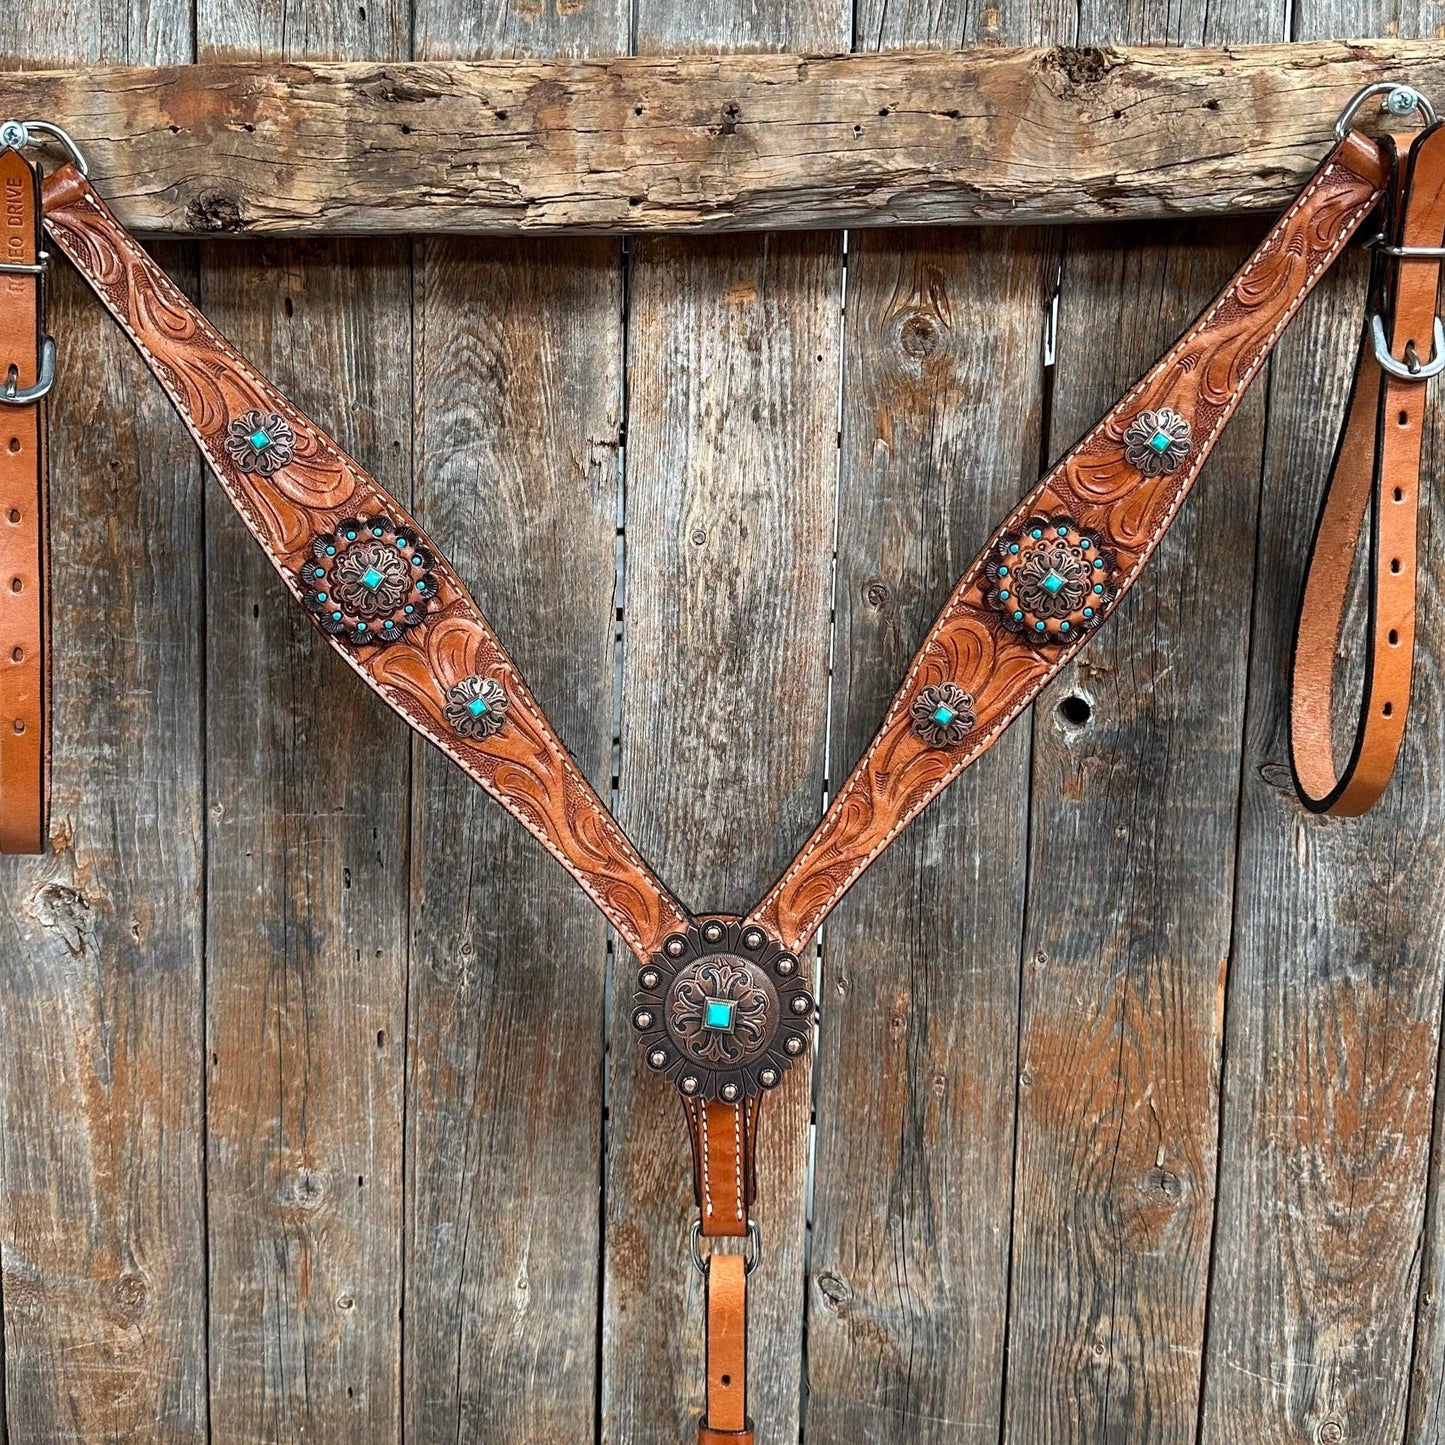 Light Oil V Brow Copper and Turquoise Browband & Breastcollar Tack Set #BBBC557 - RODEO DRIVE